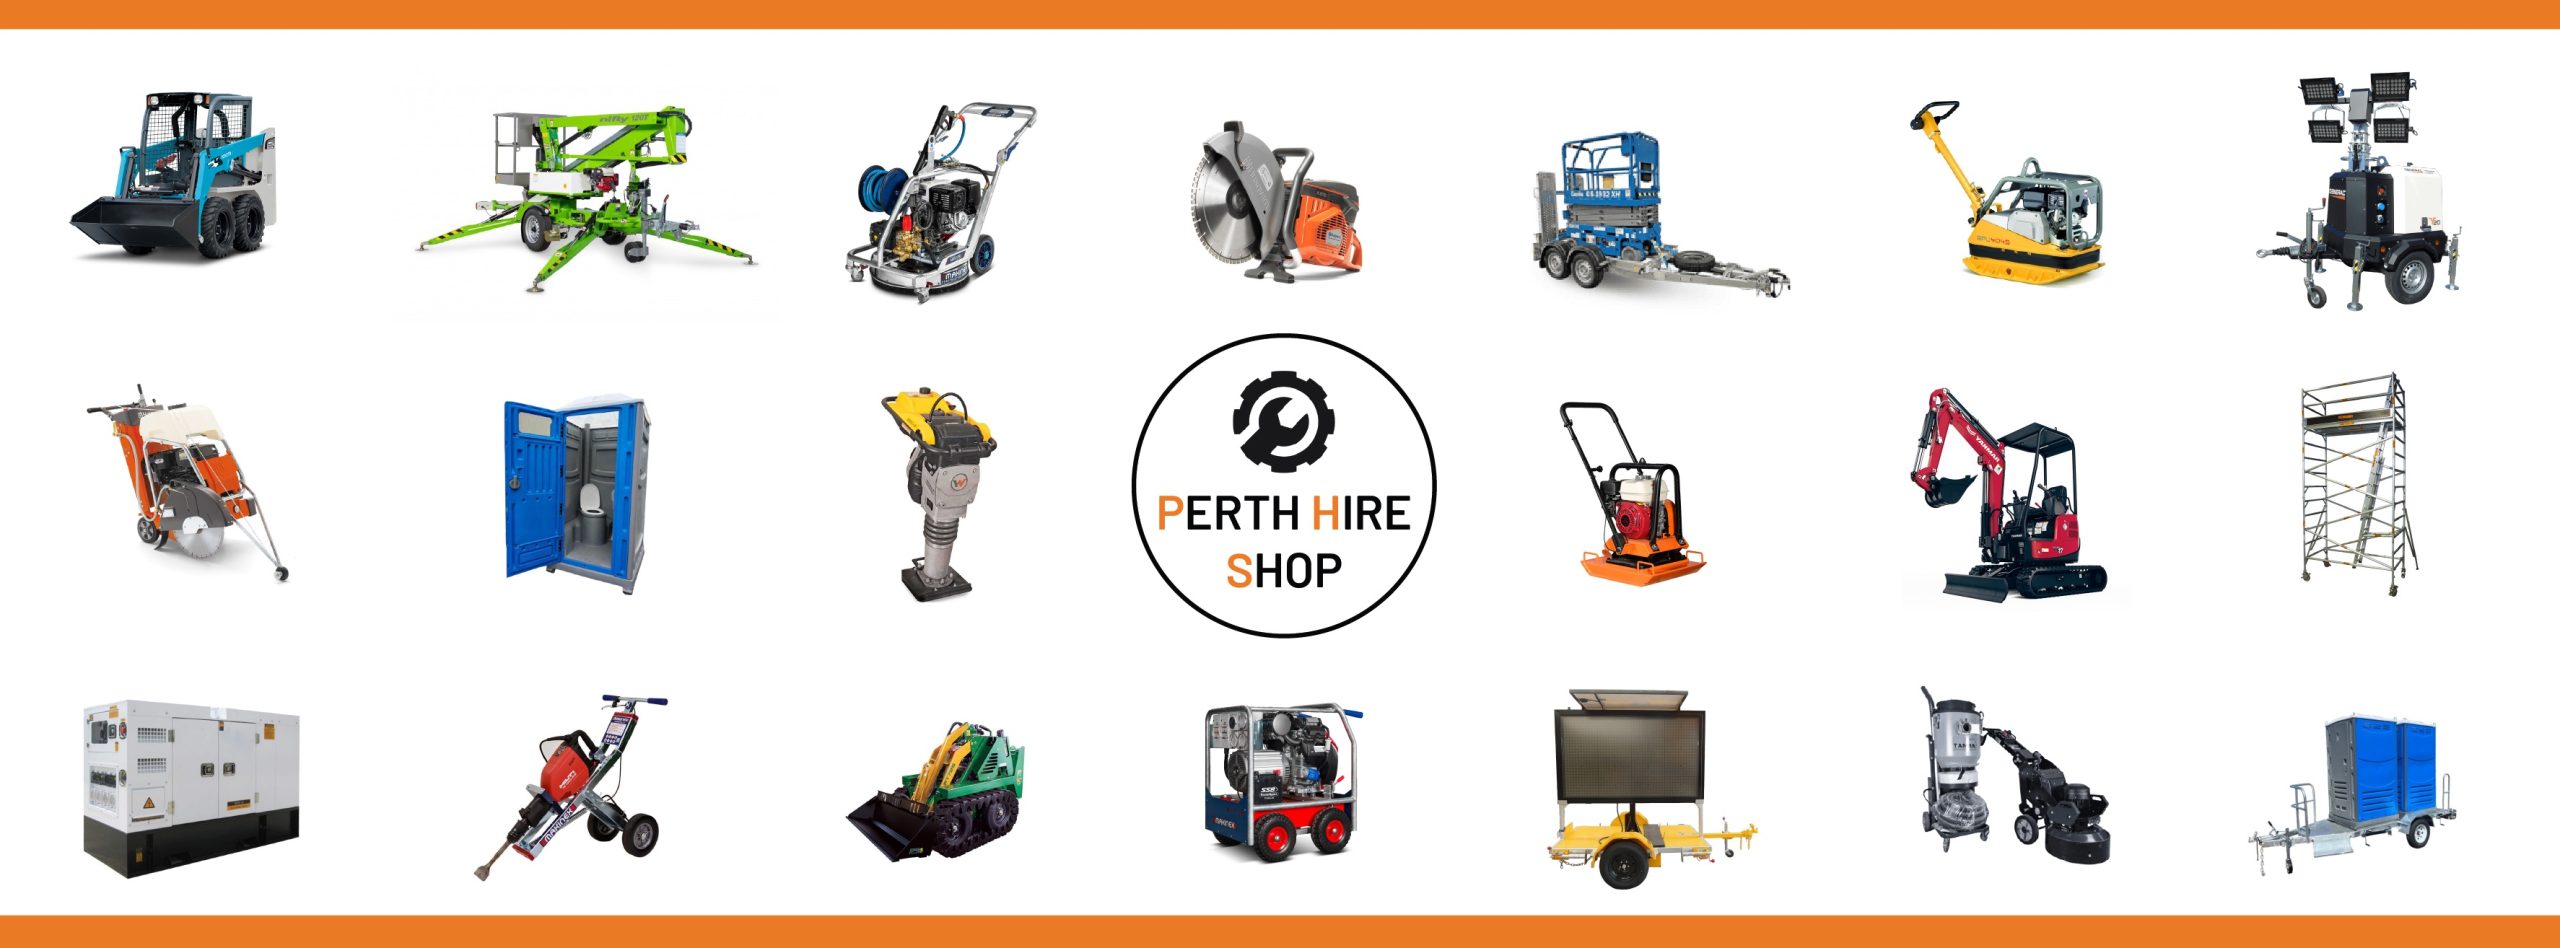 Perth Hire Shop - Plant Tools and Equipment for Hire in Perth